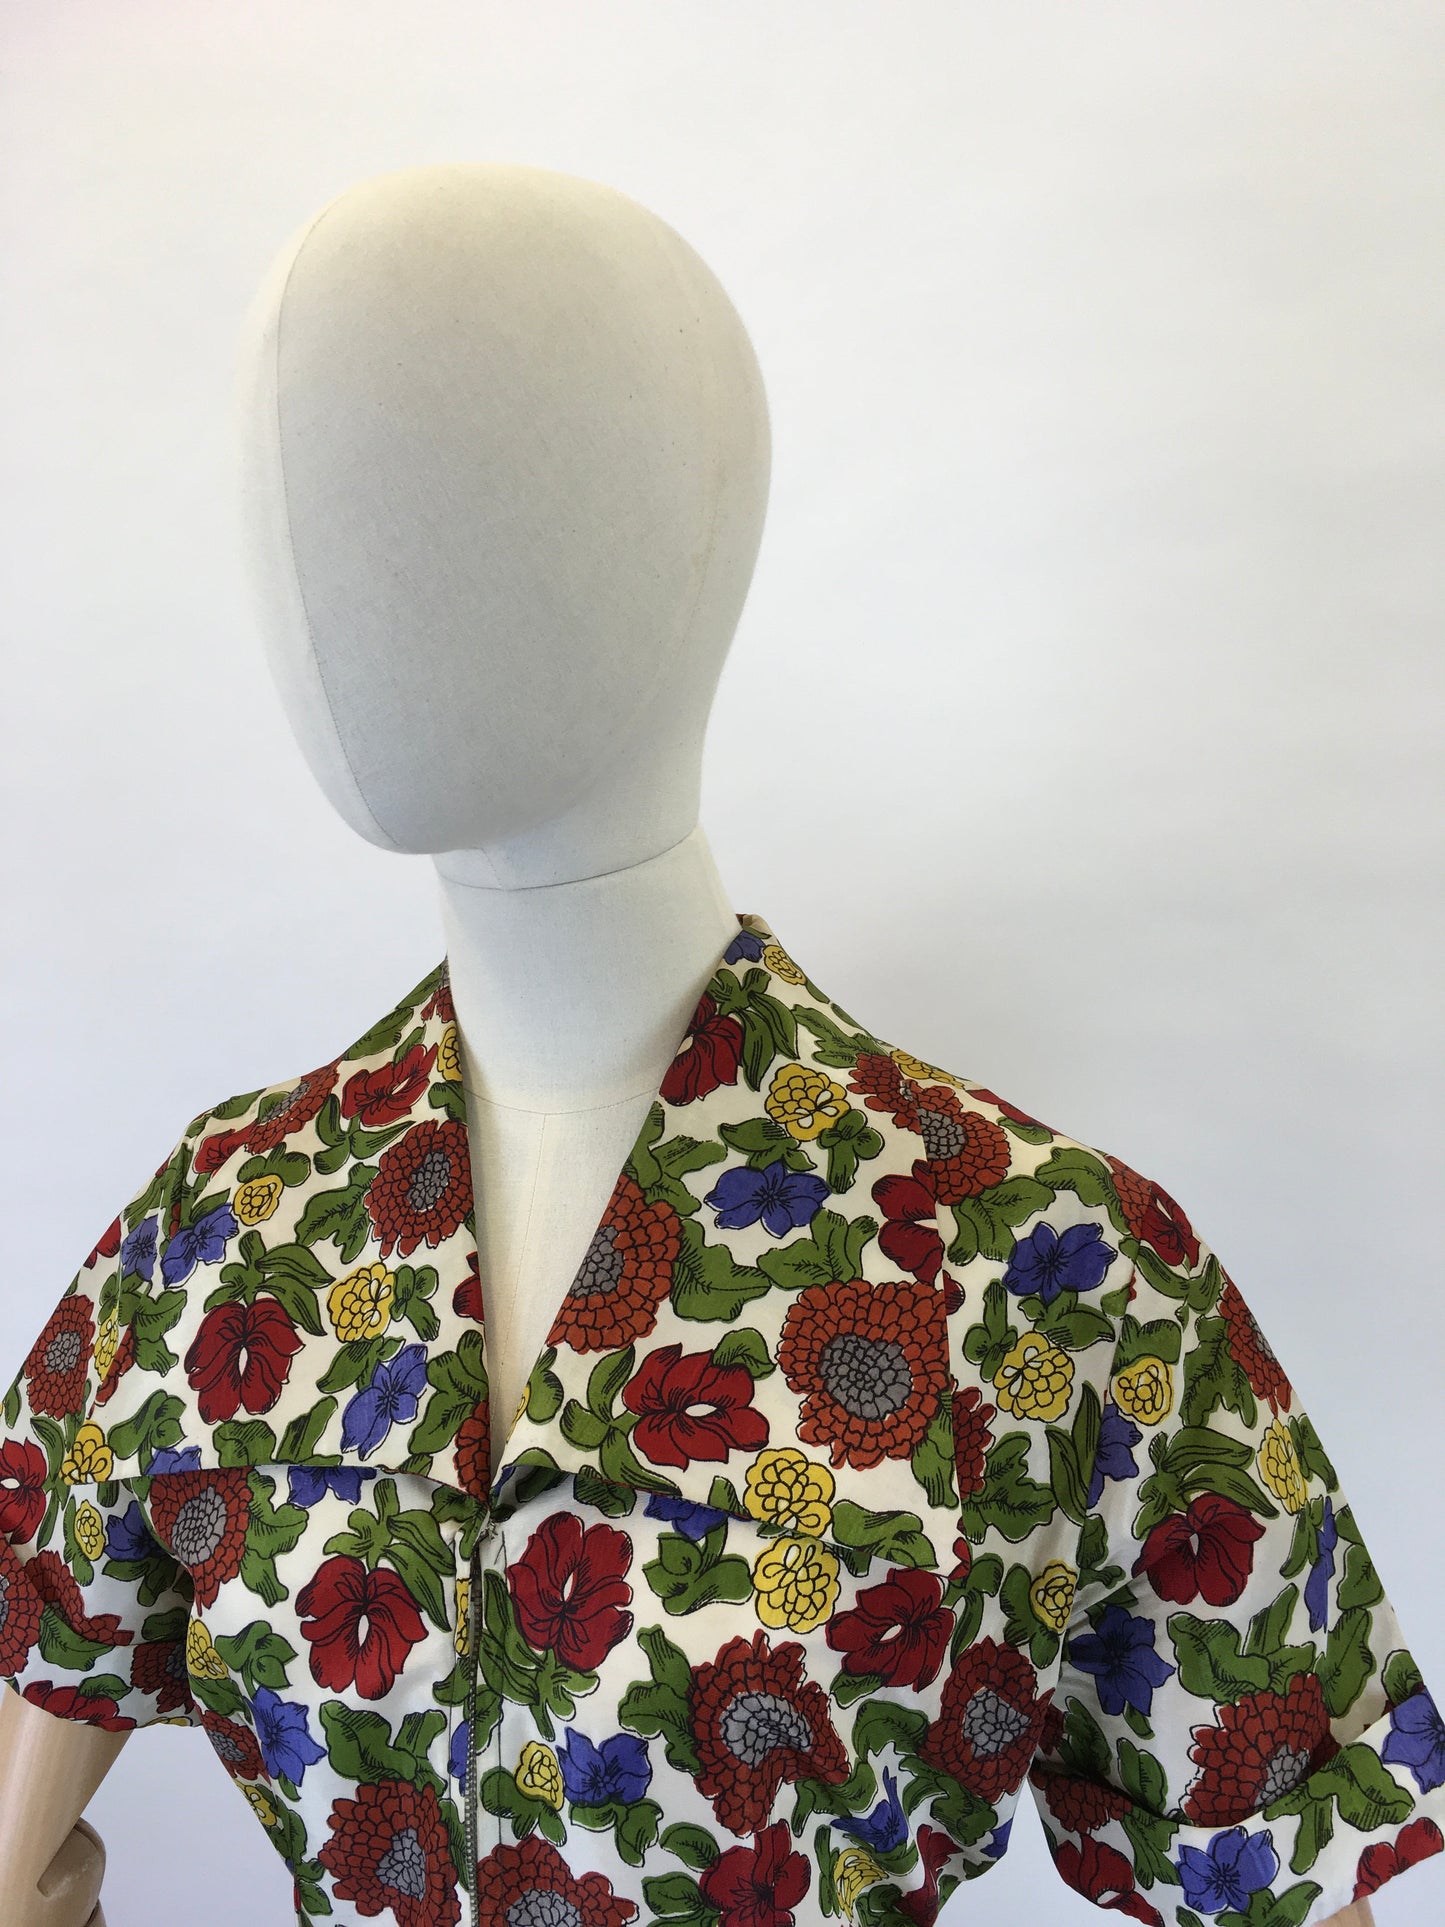 Original 1940s Floral Zip Front Dress - In Lovely Autumnal Shades of Rich Wines, Blues, Yellows and Greens